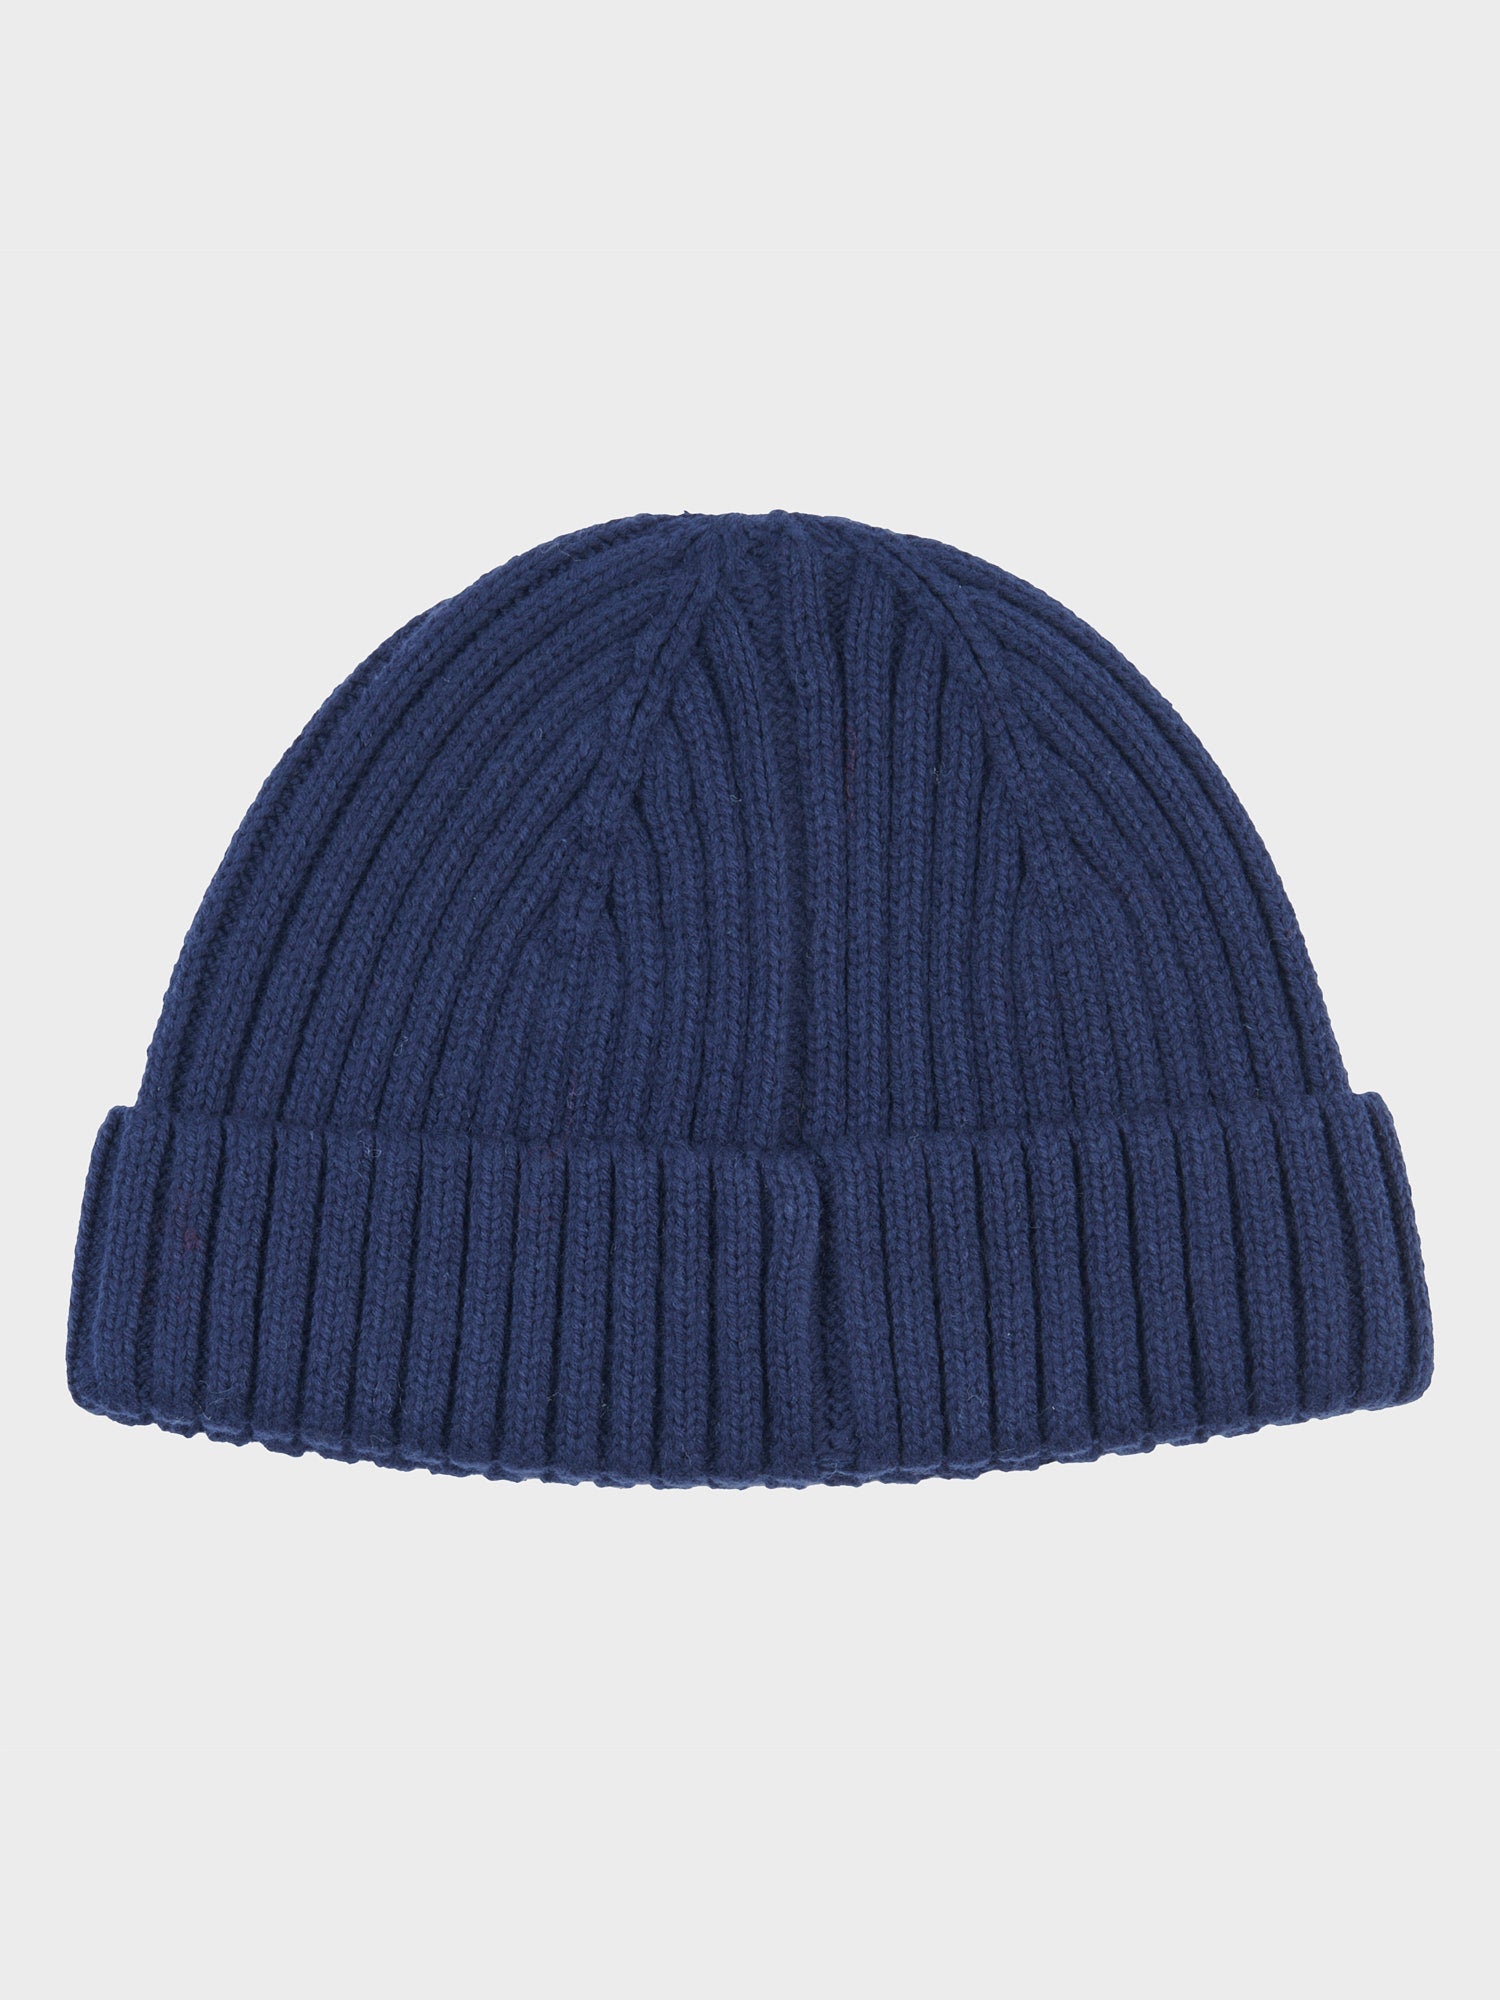 Ribbed Fisherman Beanie in Navy Blue